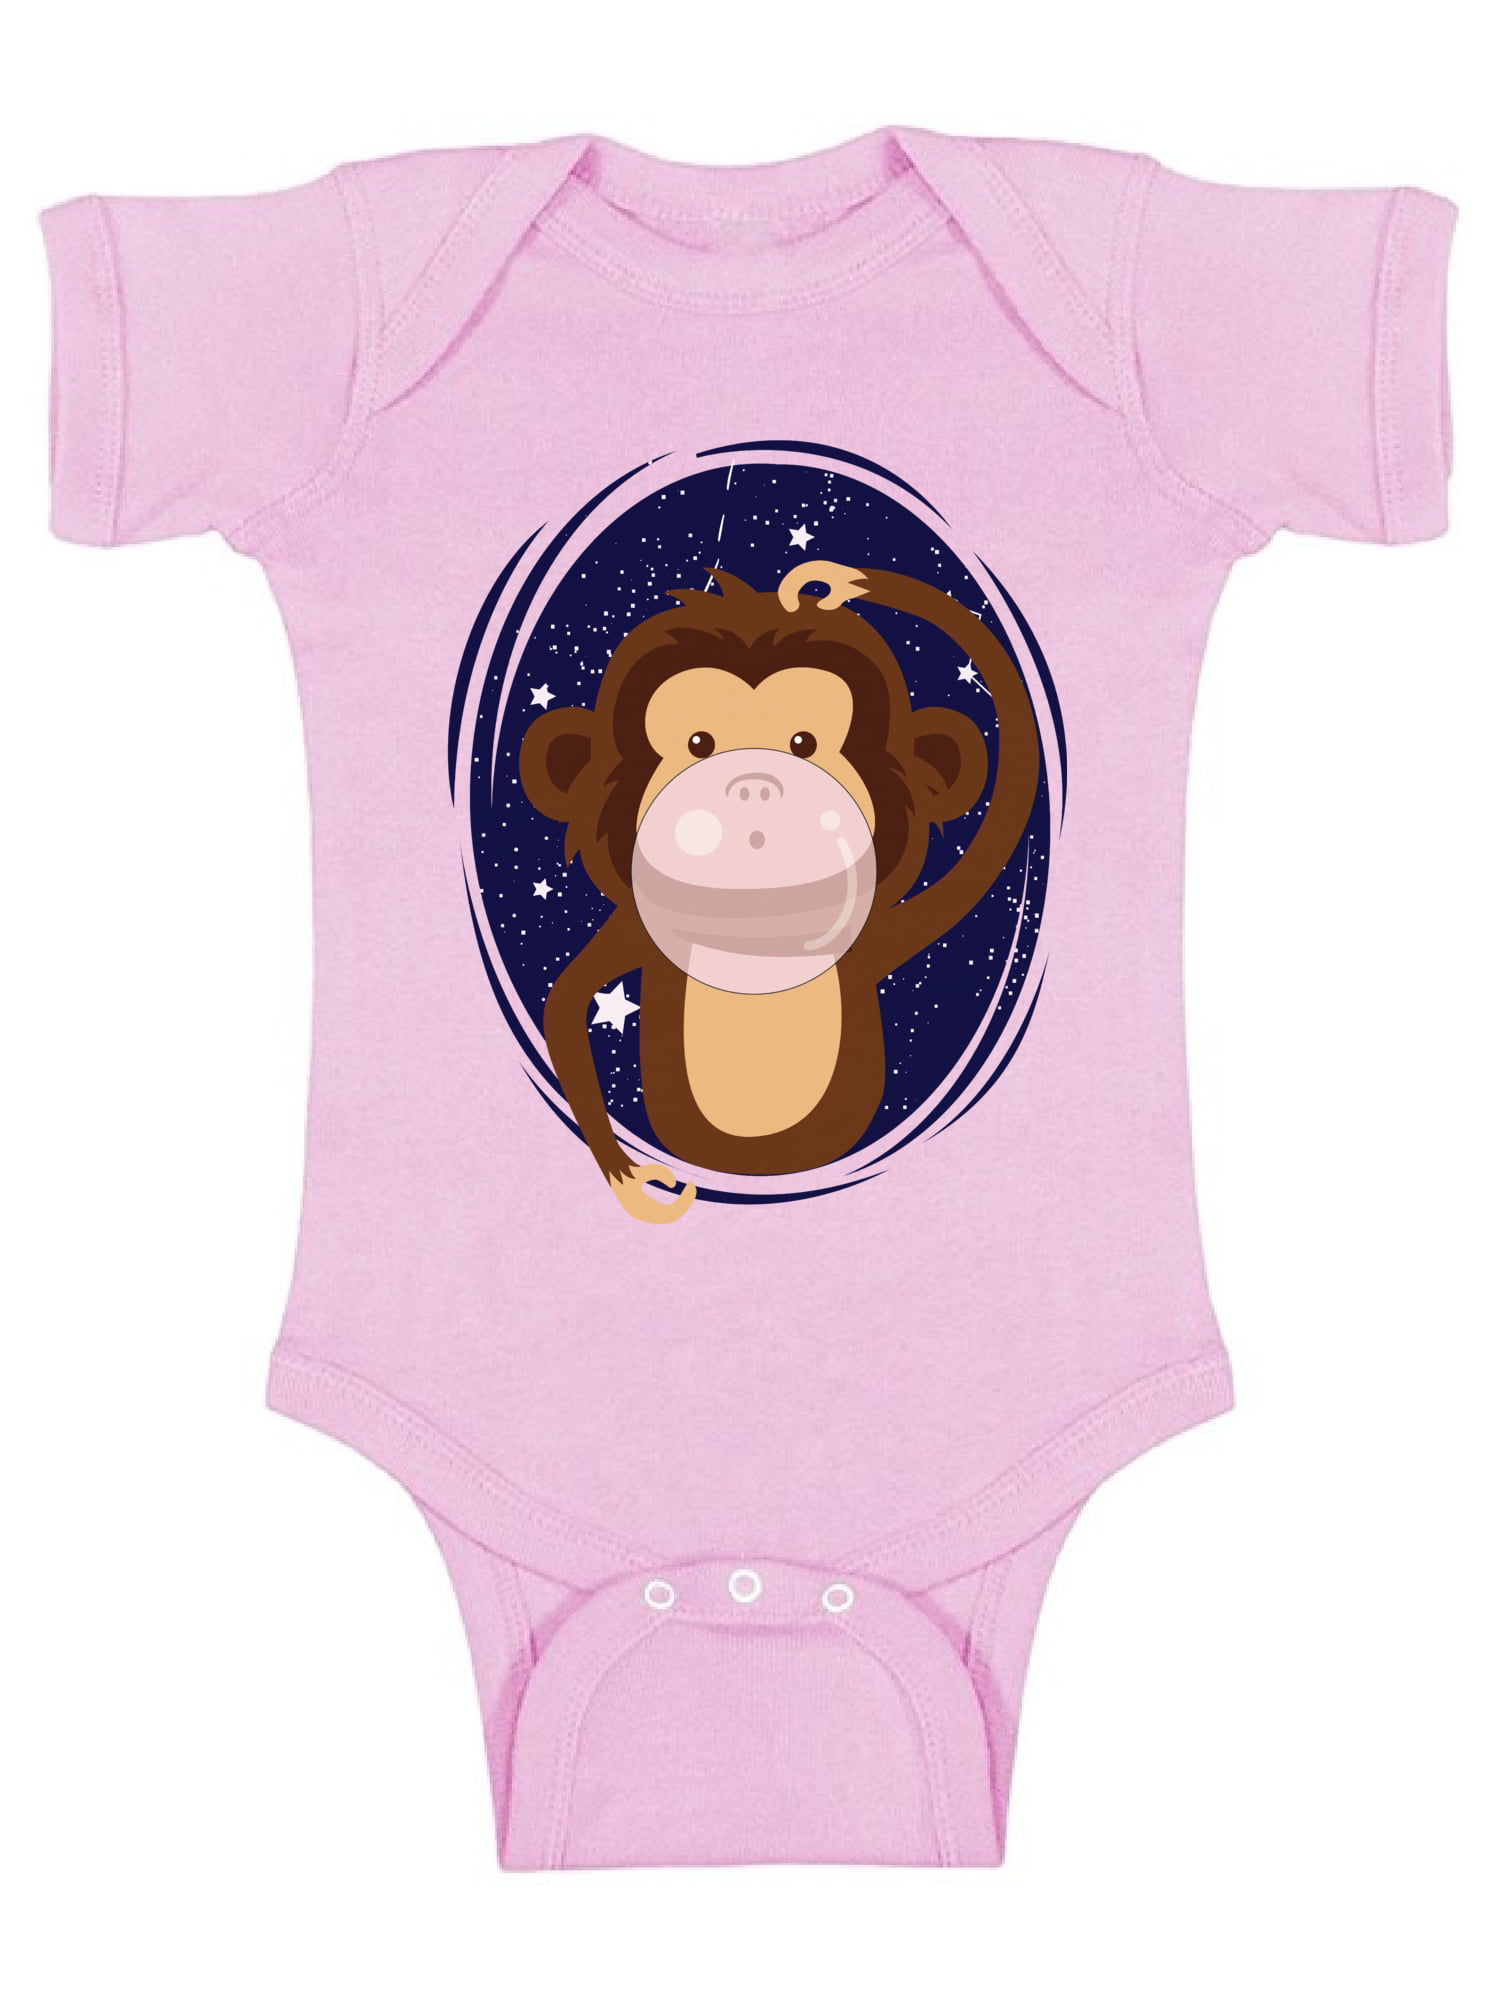 Great baby shower gift MARSHMELLOW MAN Funny one piece body suit 